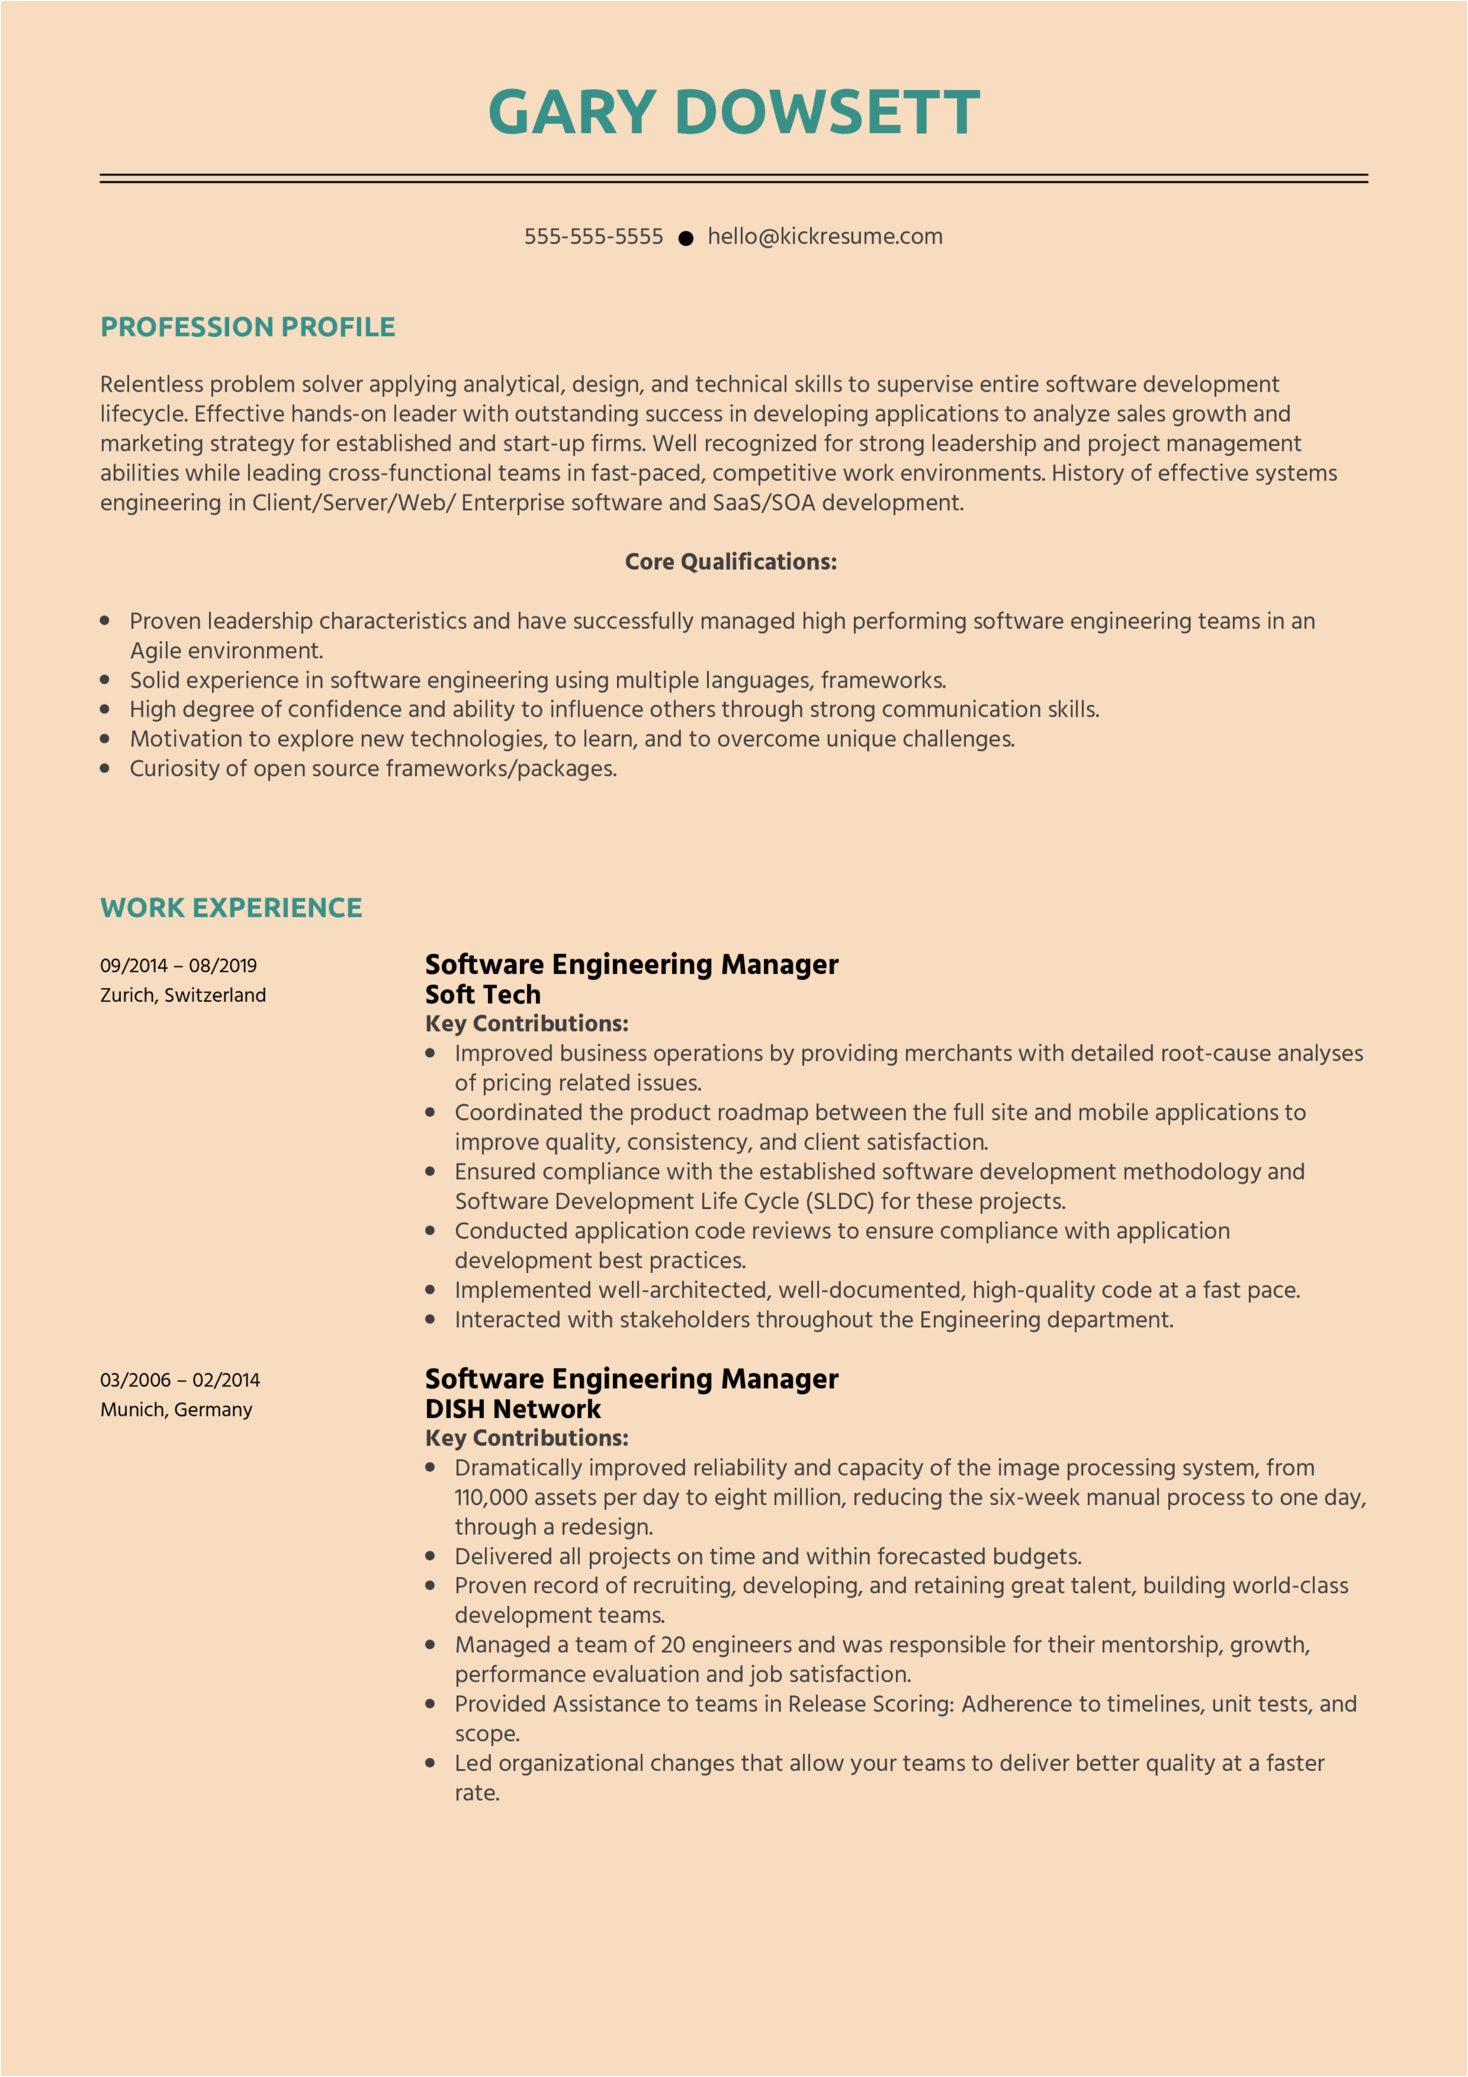 Best software Engineering Manager Resume Samples Engineering Manager Resume Example Best Resume Examples